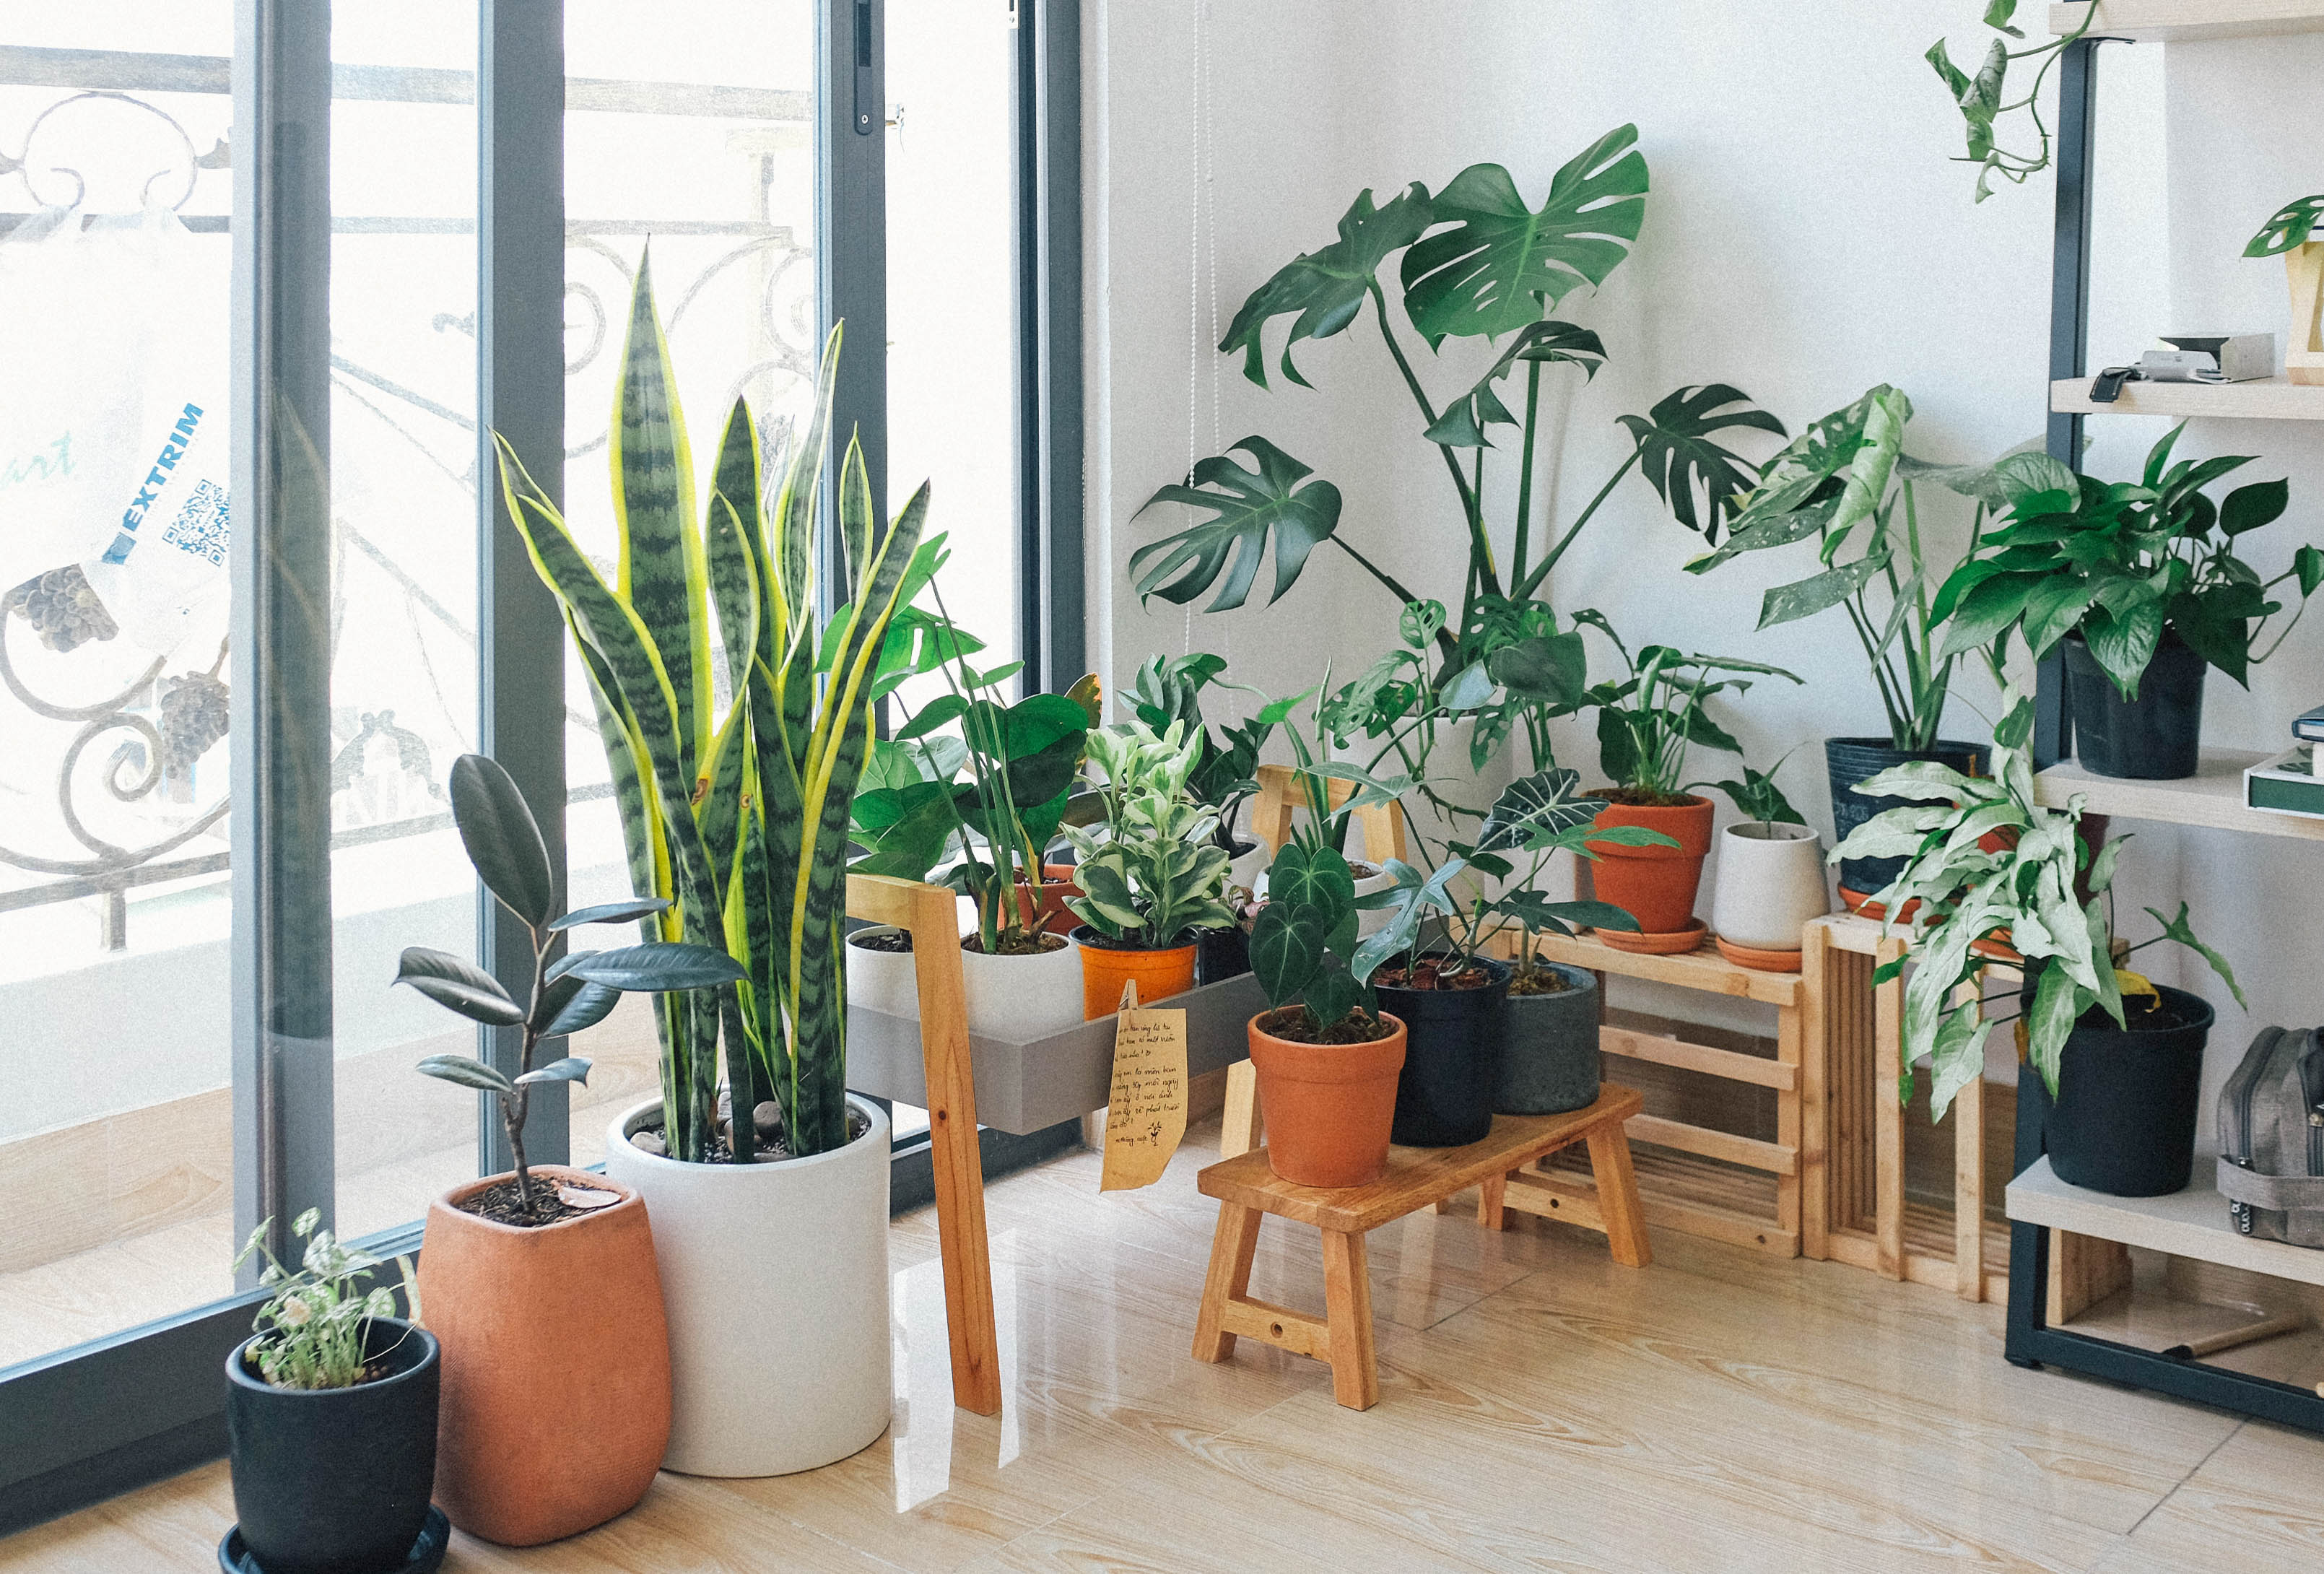 A variety of potted houseplants